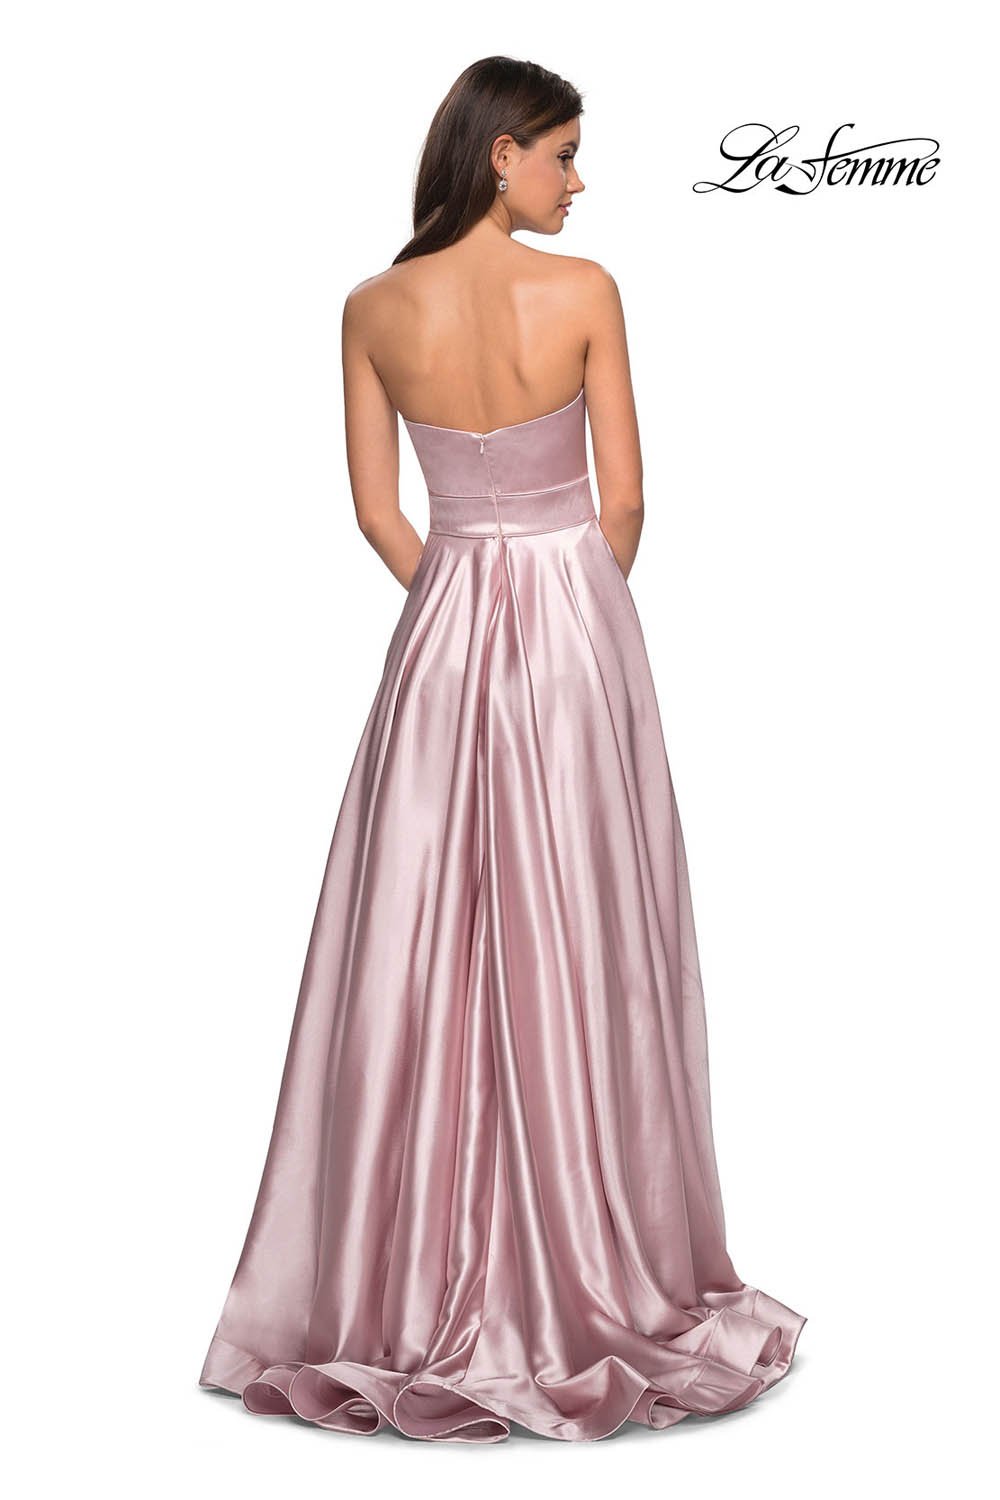 La Femme 27506 dress images in these colors: Dark Periwinkle, Rose Gold, Teal.